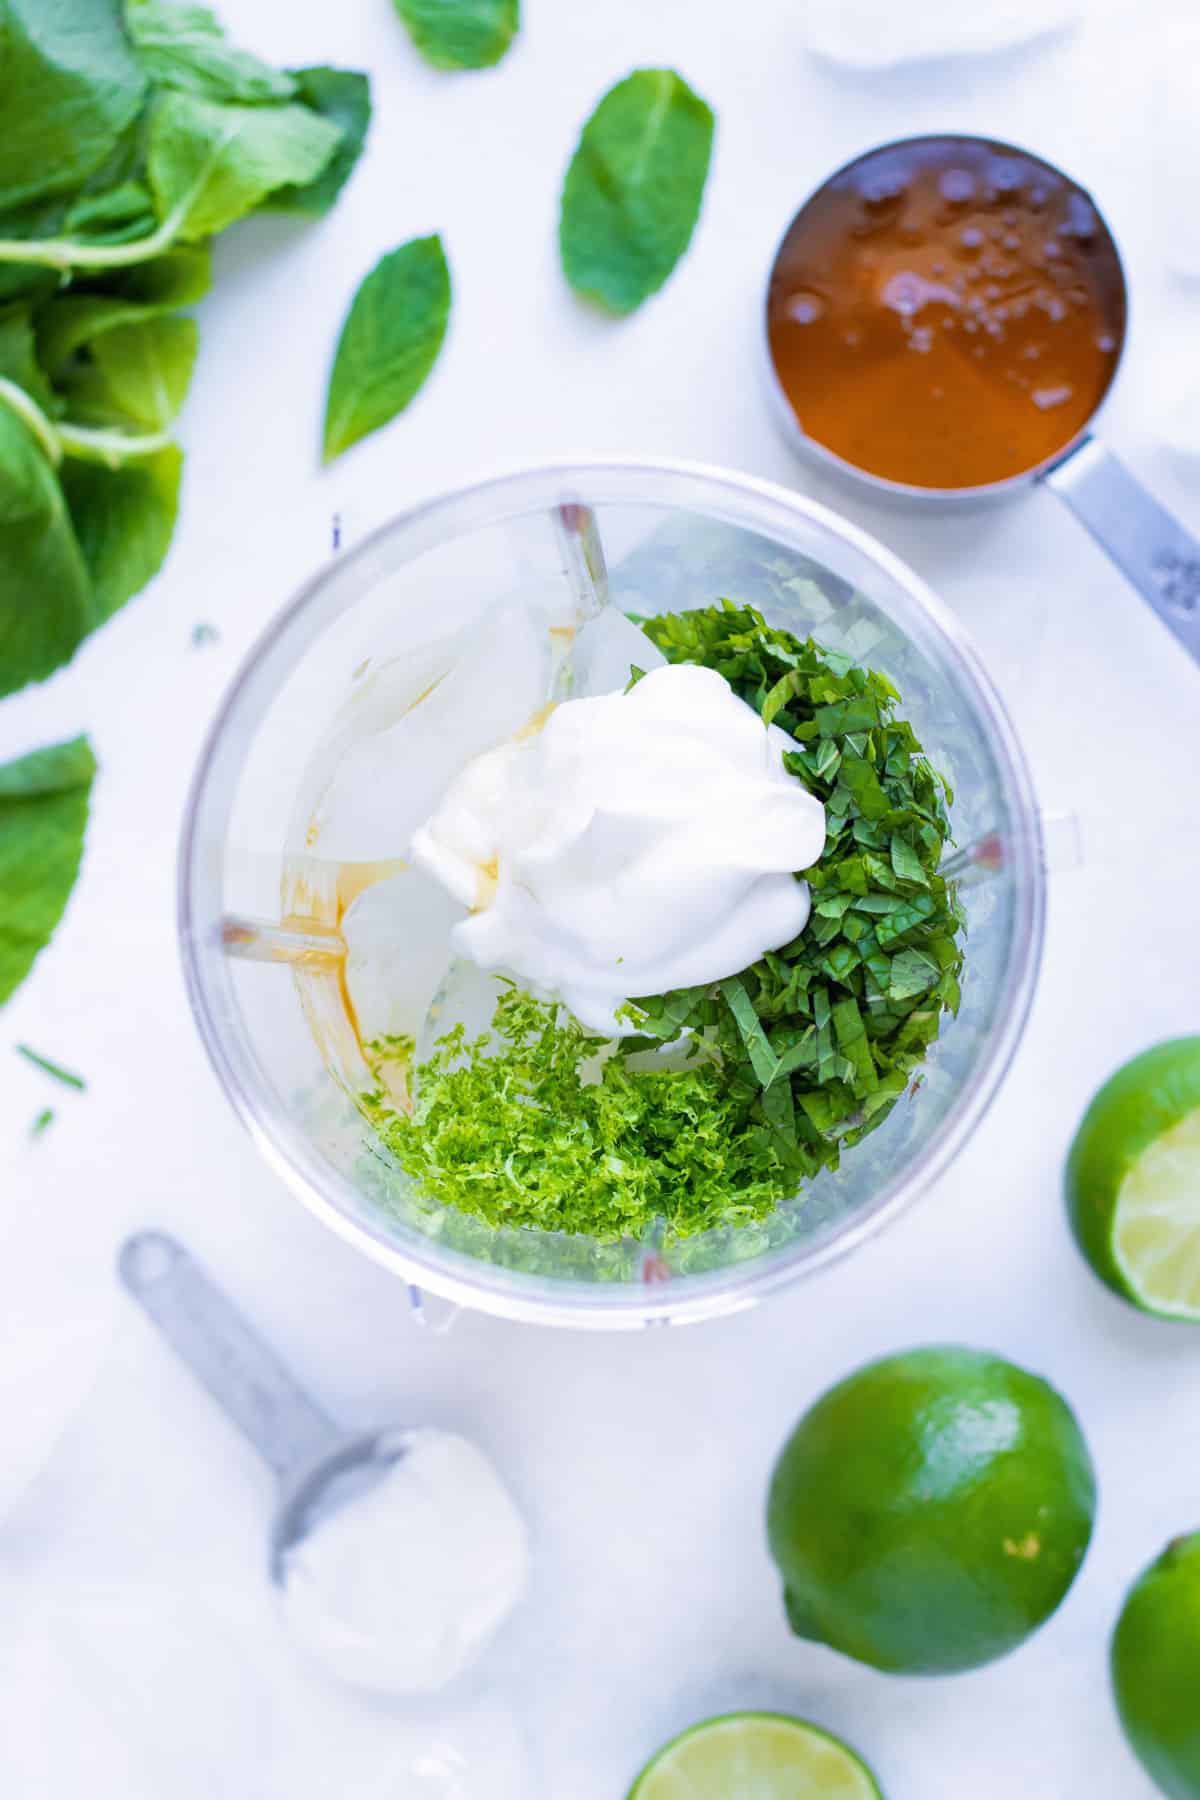 The ingredients to make a mojito are added to a blender.